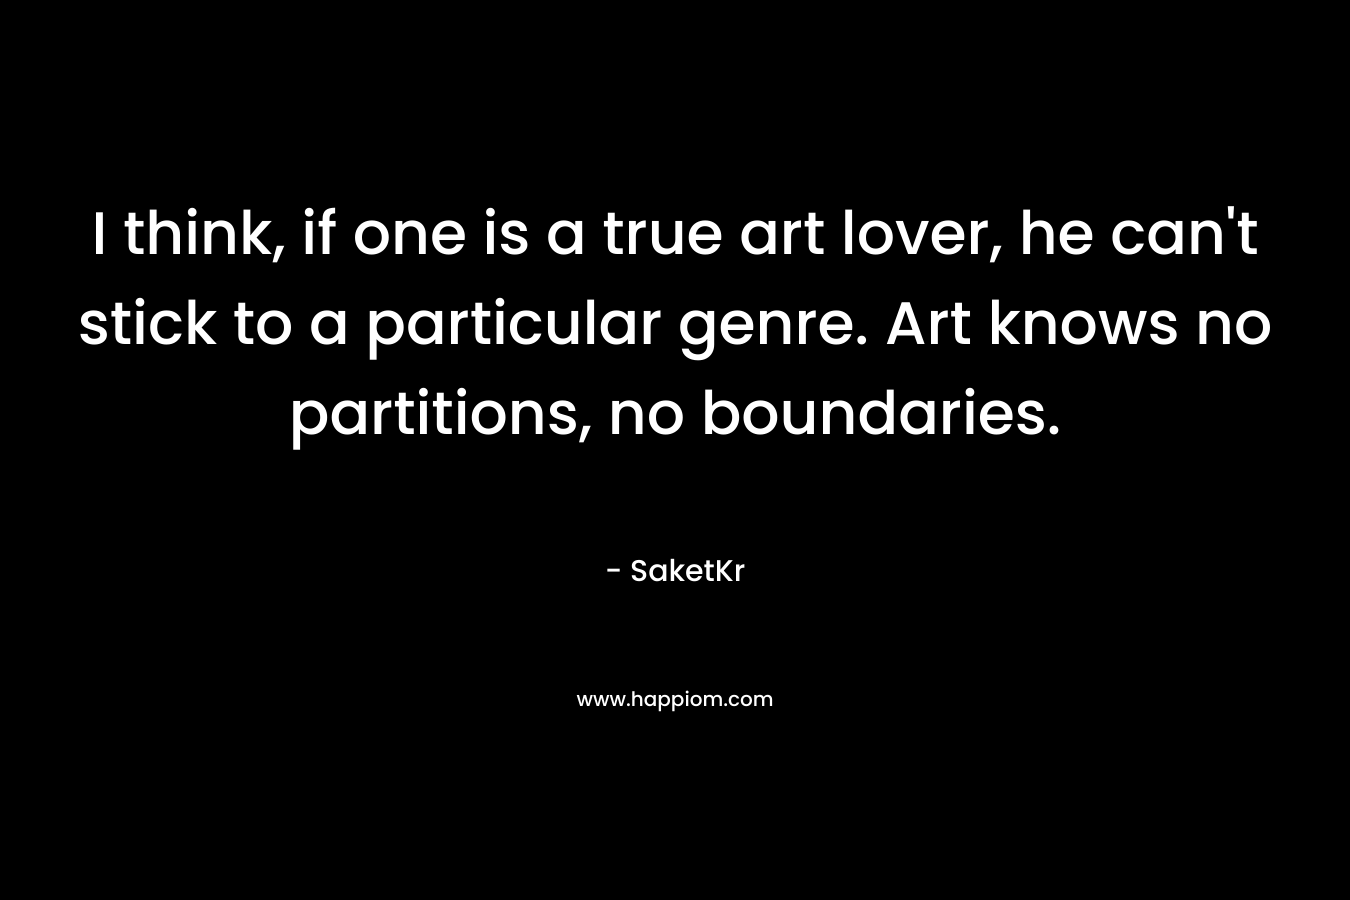 I think, if one is a true art lover, he can't stick to a particular genre. Art knows no partitions, no boundaries.